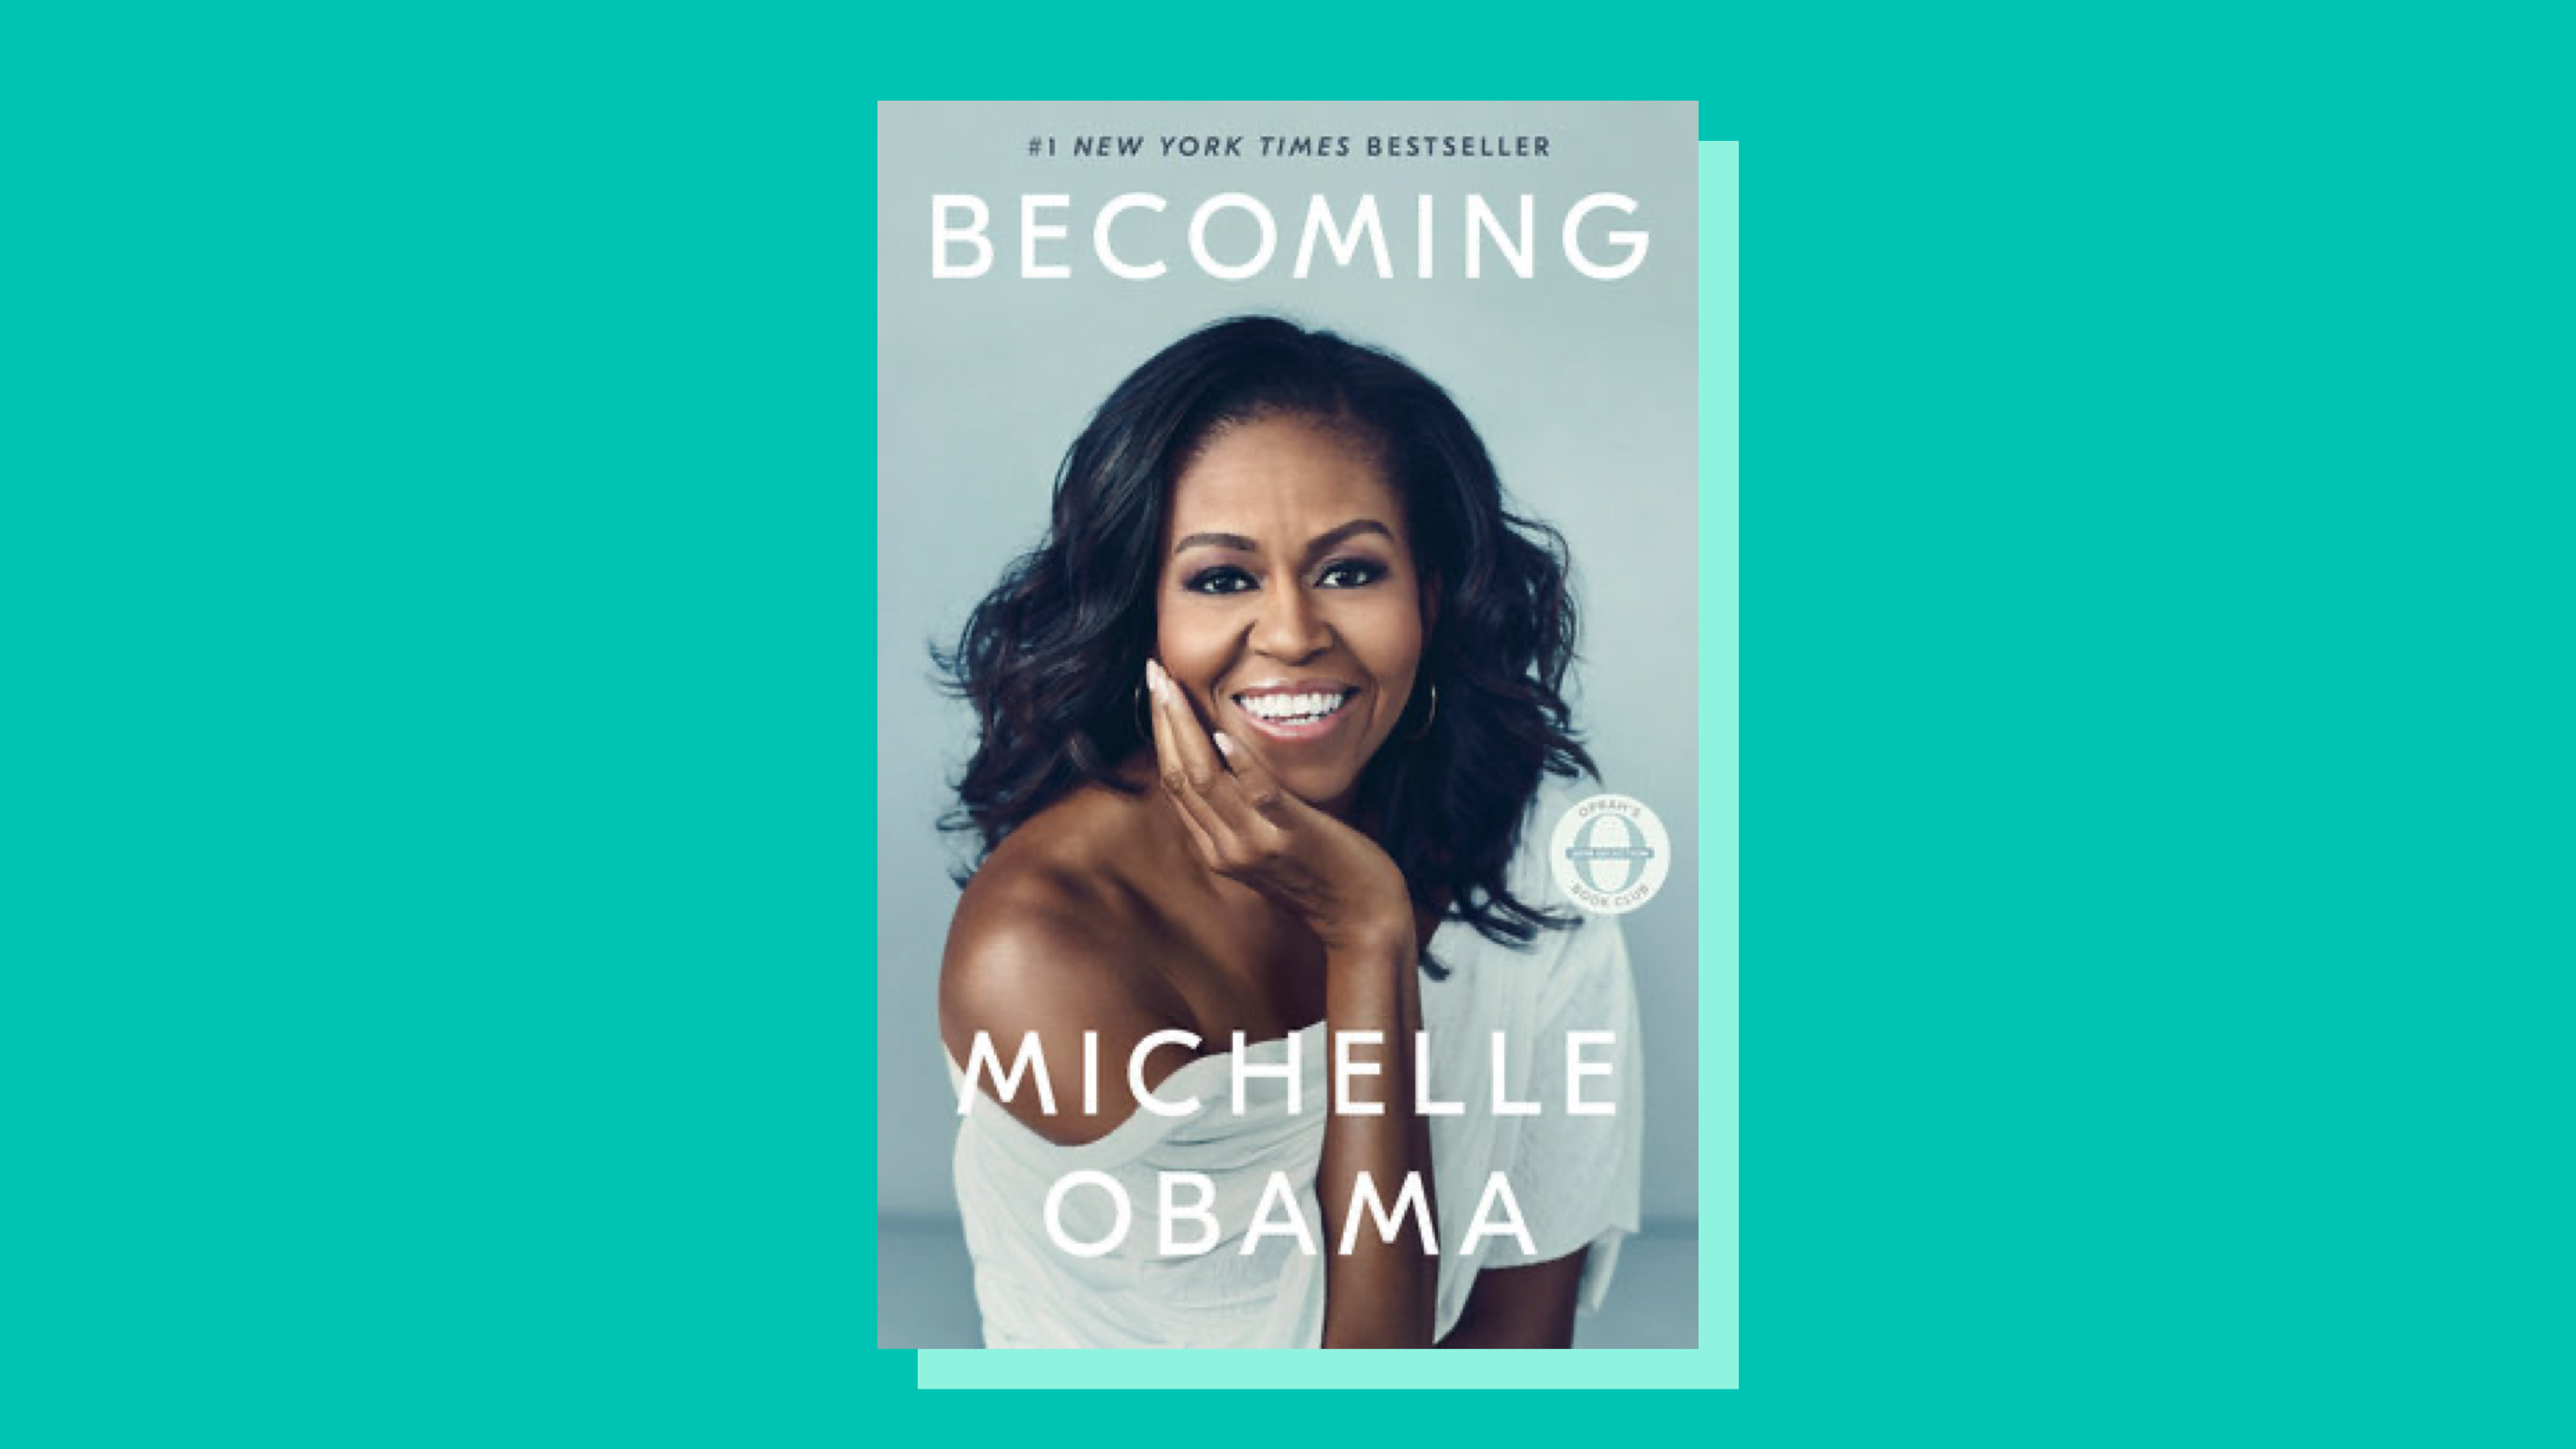 “Becoming” Michelle Obama